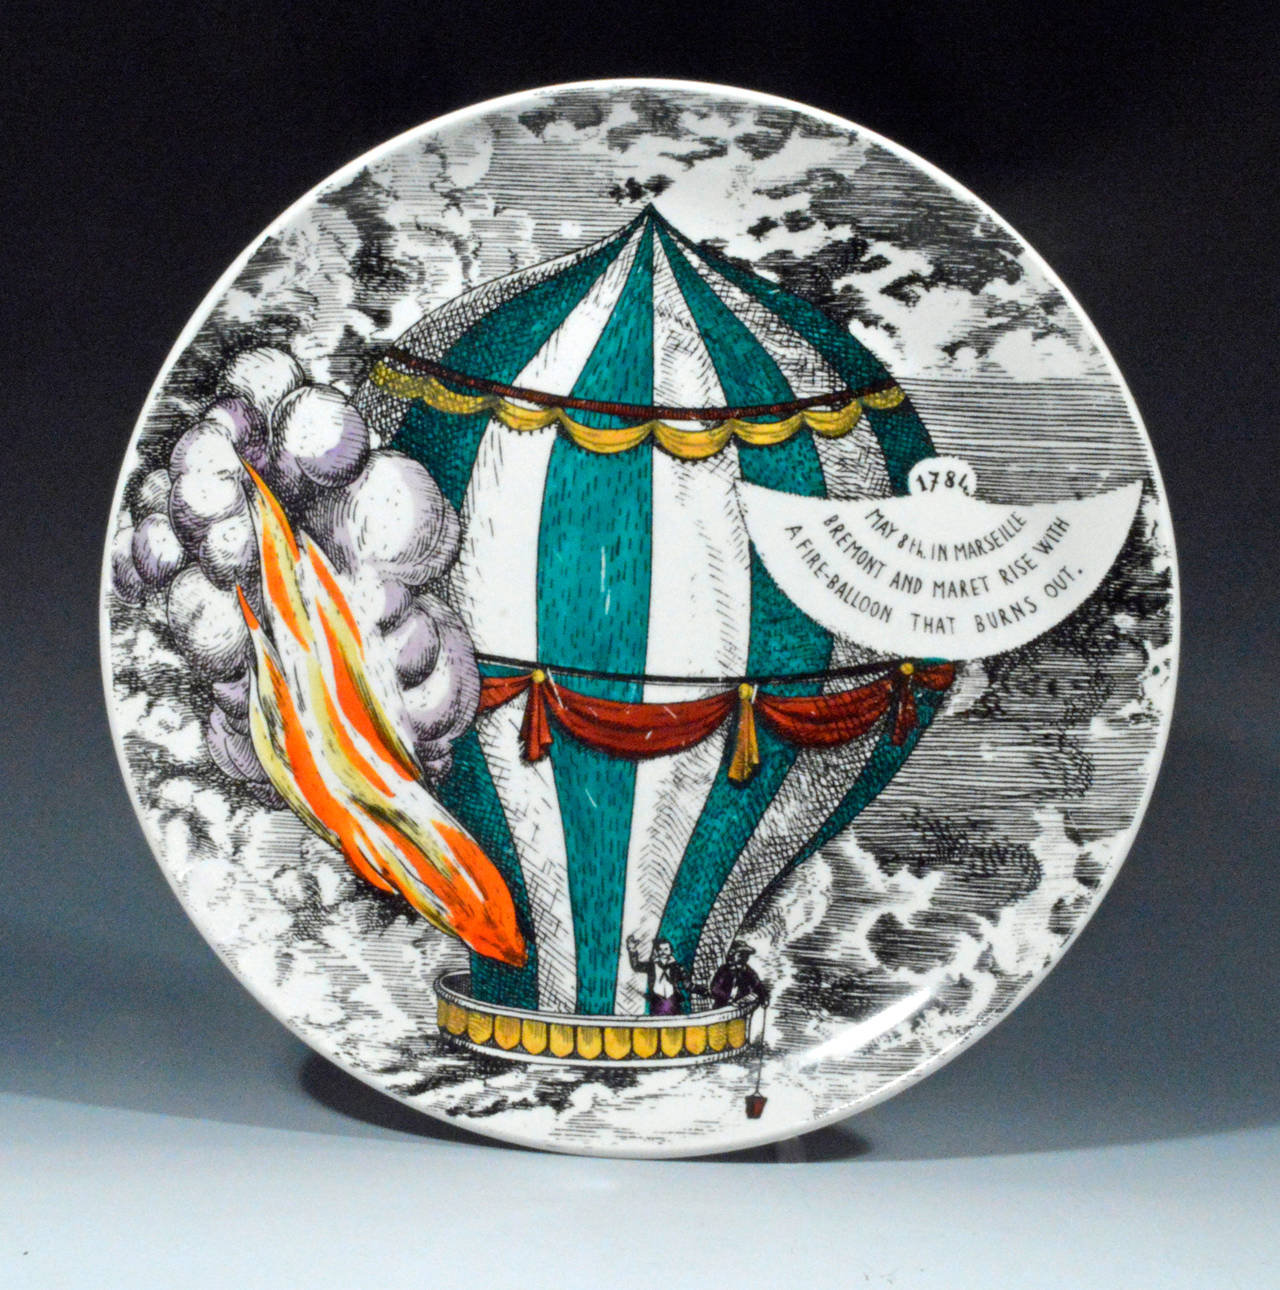 Piero Fornasetti Porcelain Plates with the Mongolfiere (Hot Air) Design 2